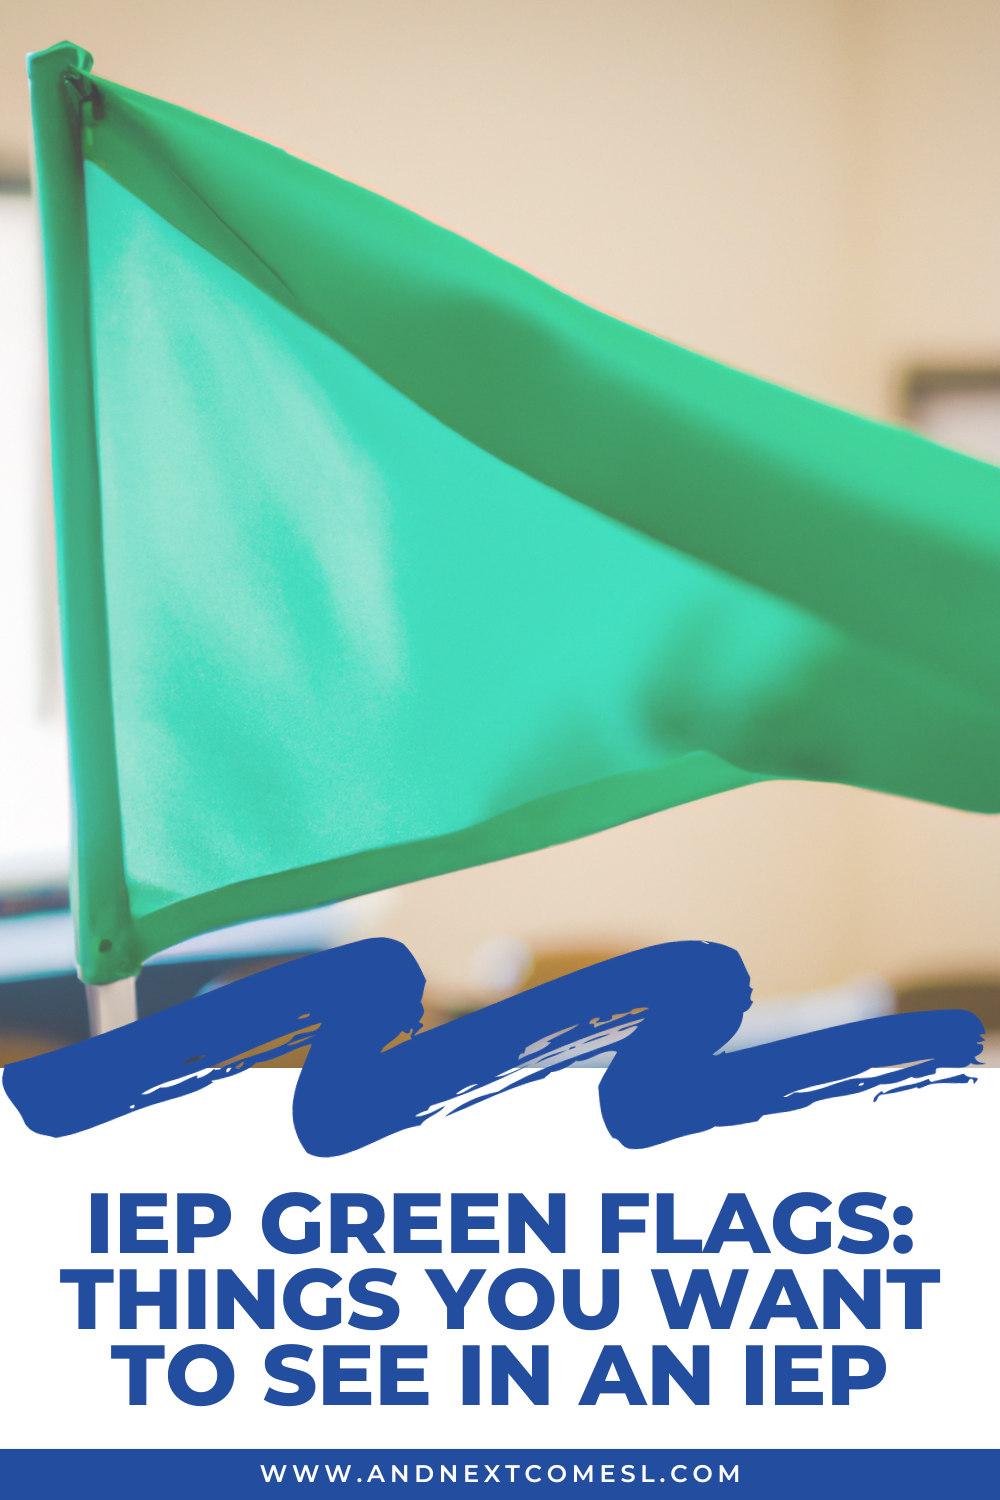 A look at some common IEP green flags or, in other words, the positive signals that you want to see in an IEP